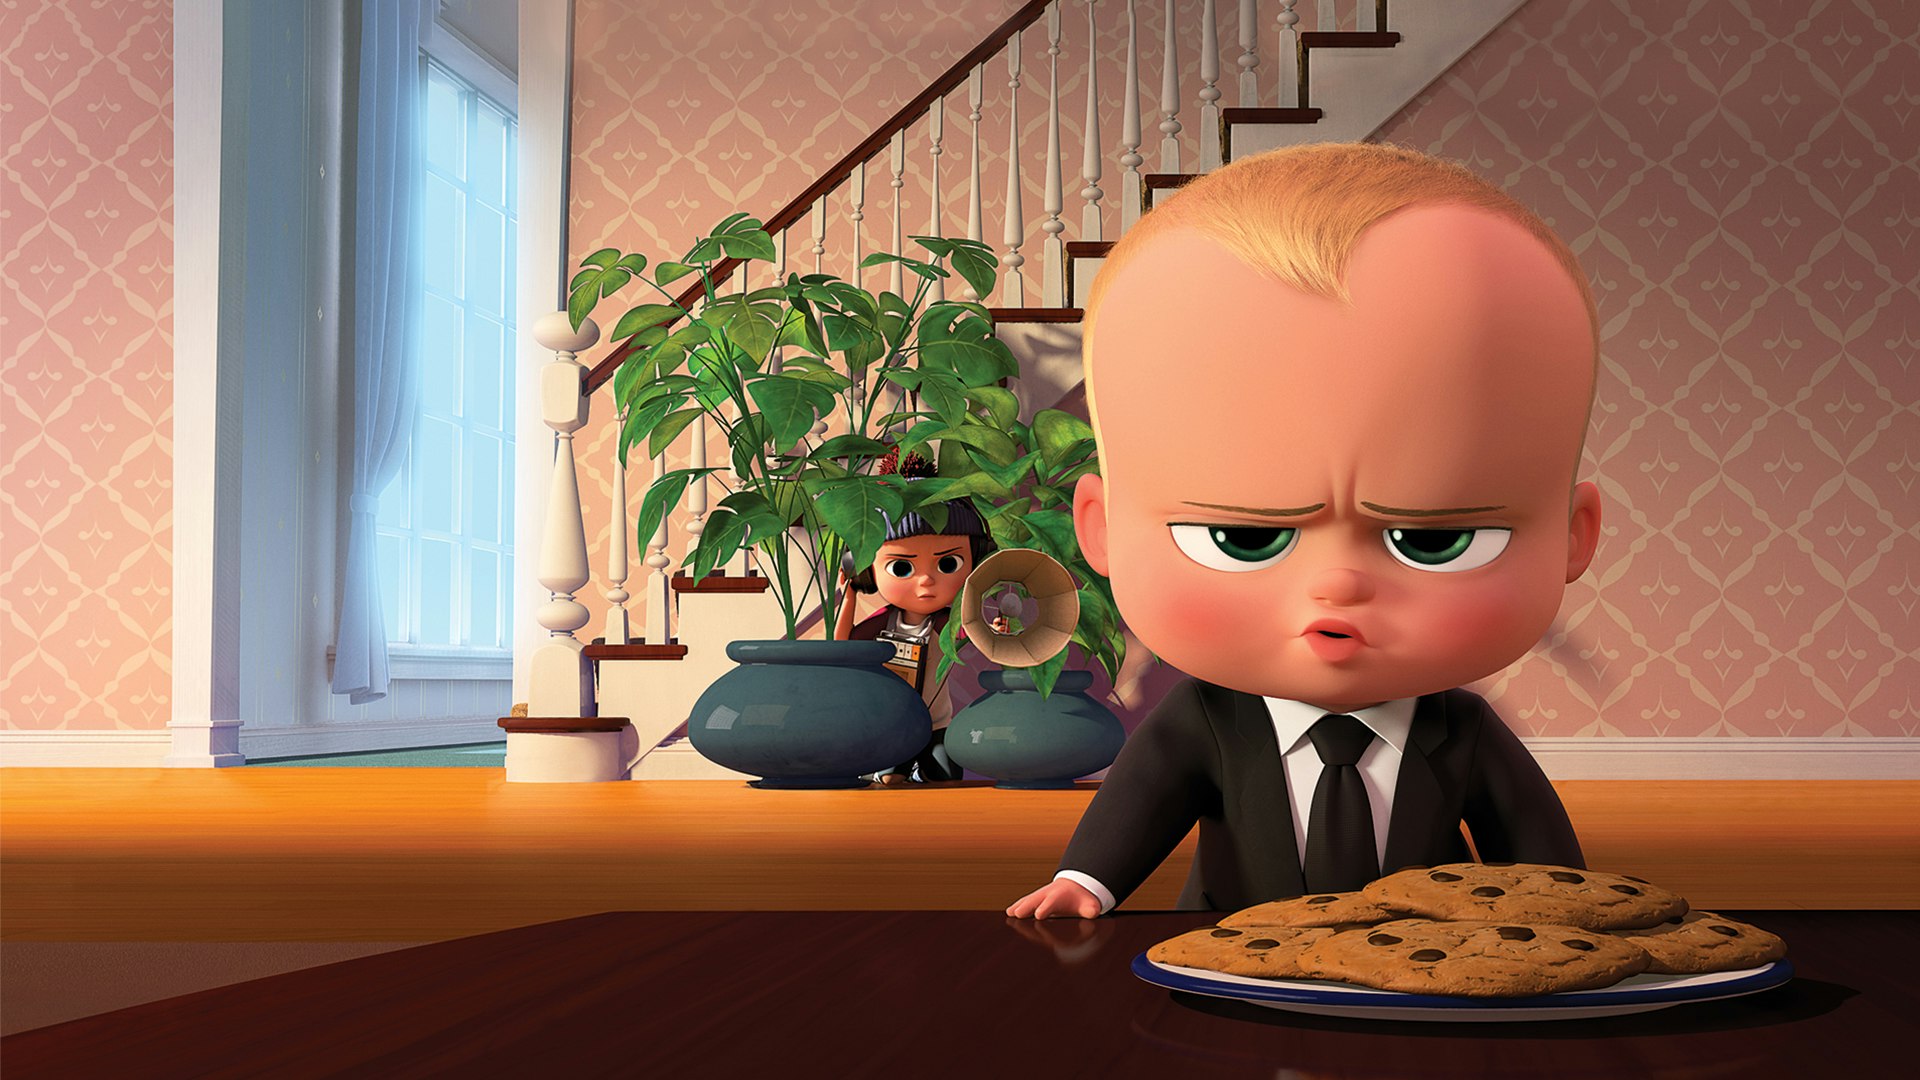 Watch The Boss Baby Online with NEON